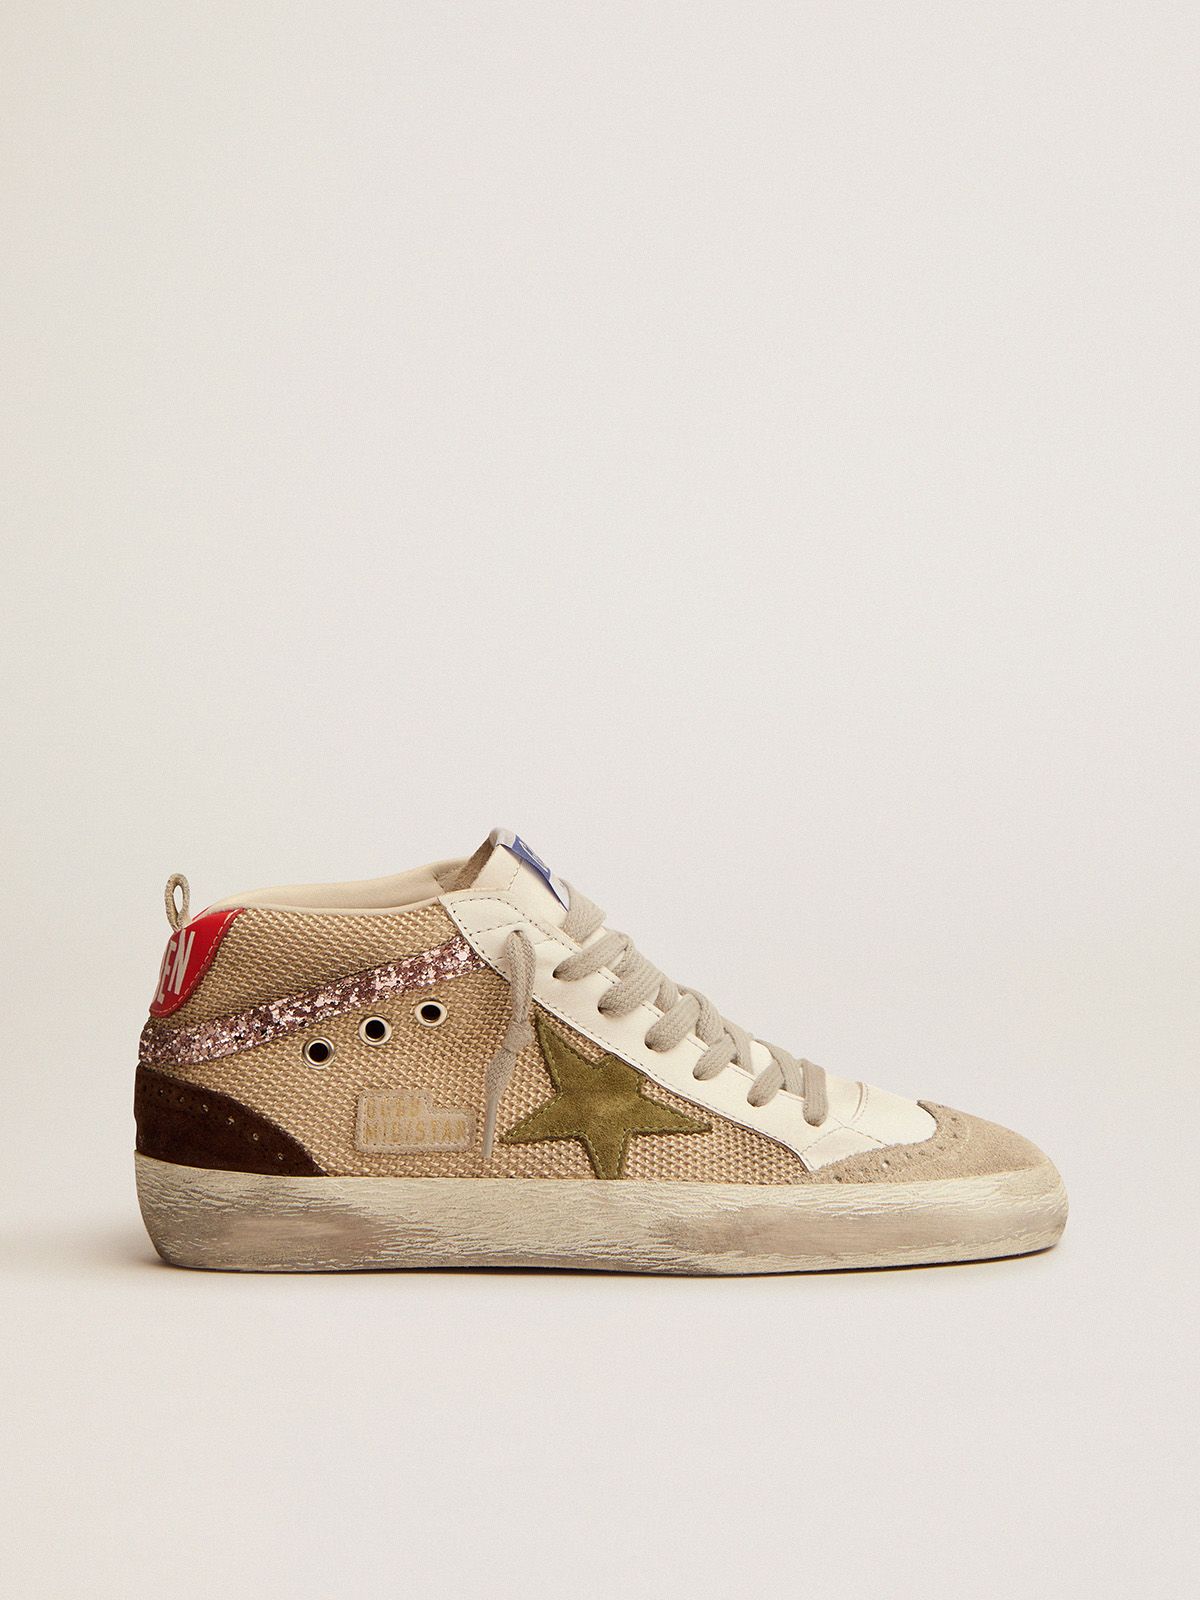 Mid Star sneakers in cream-colored mesh with suede and glitter details